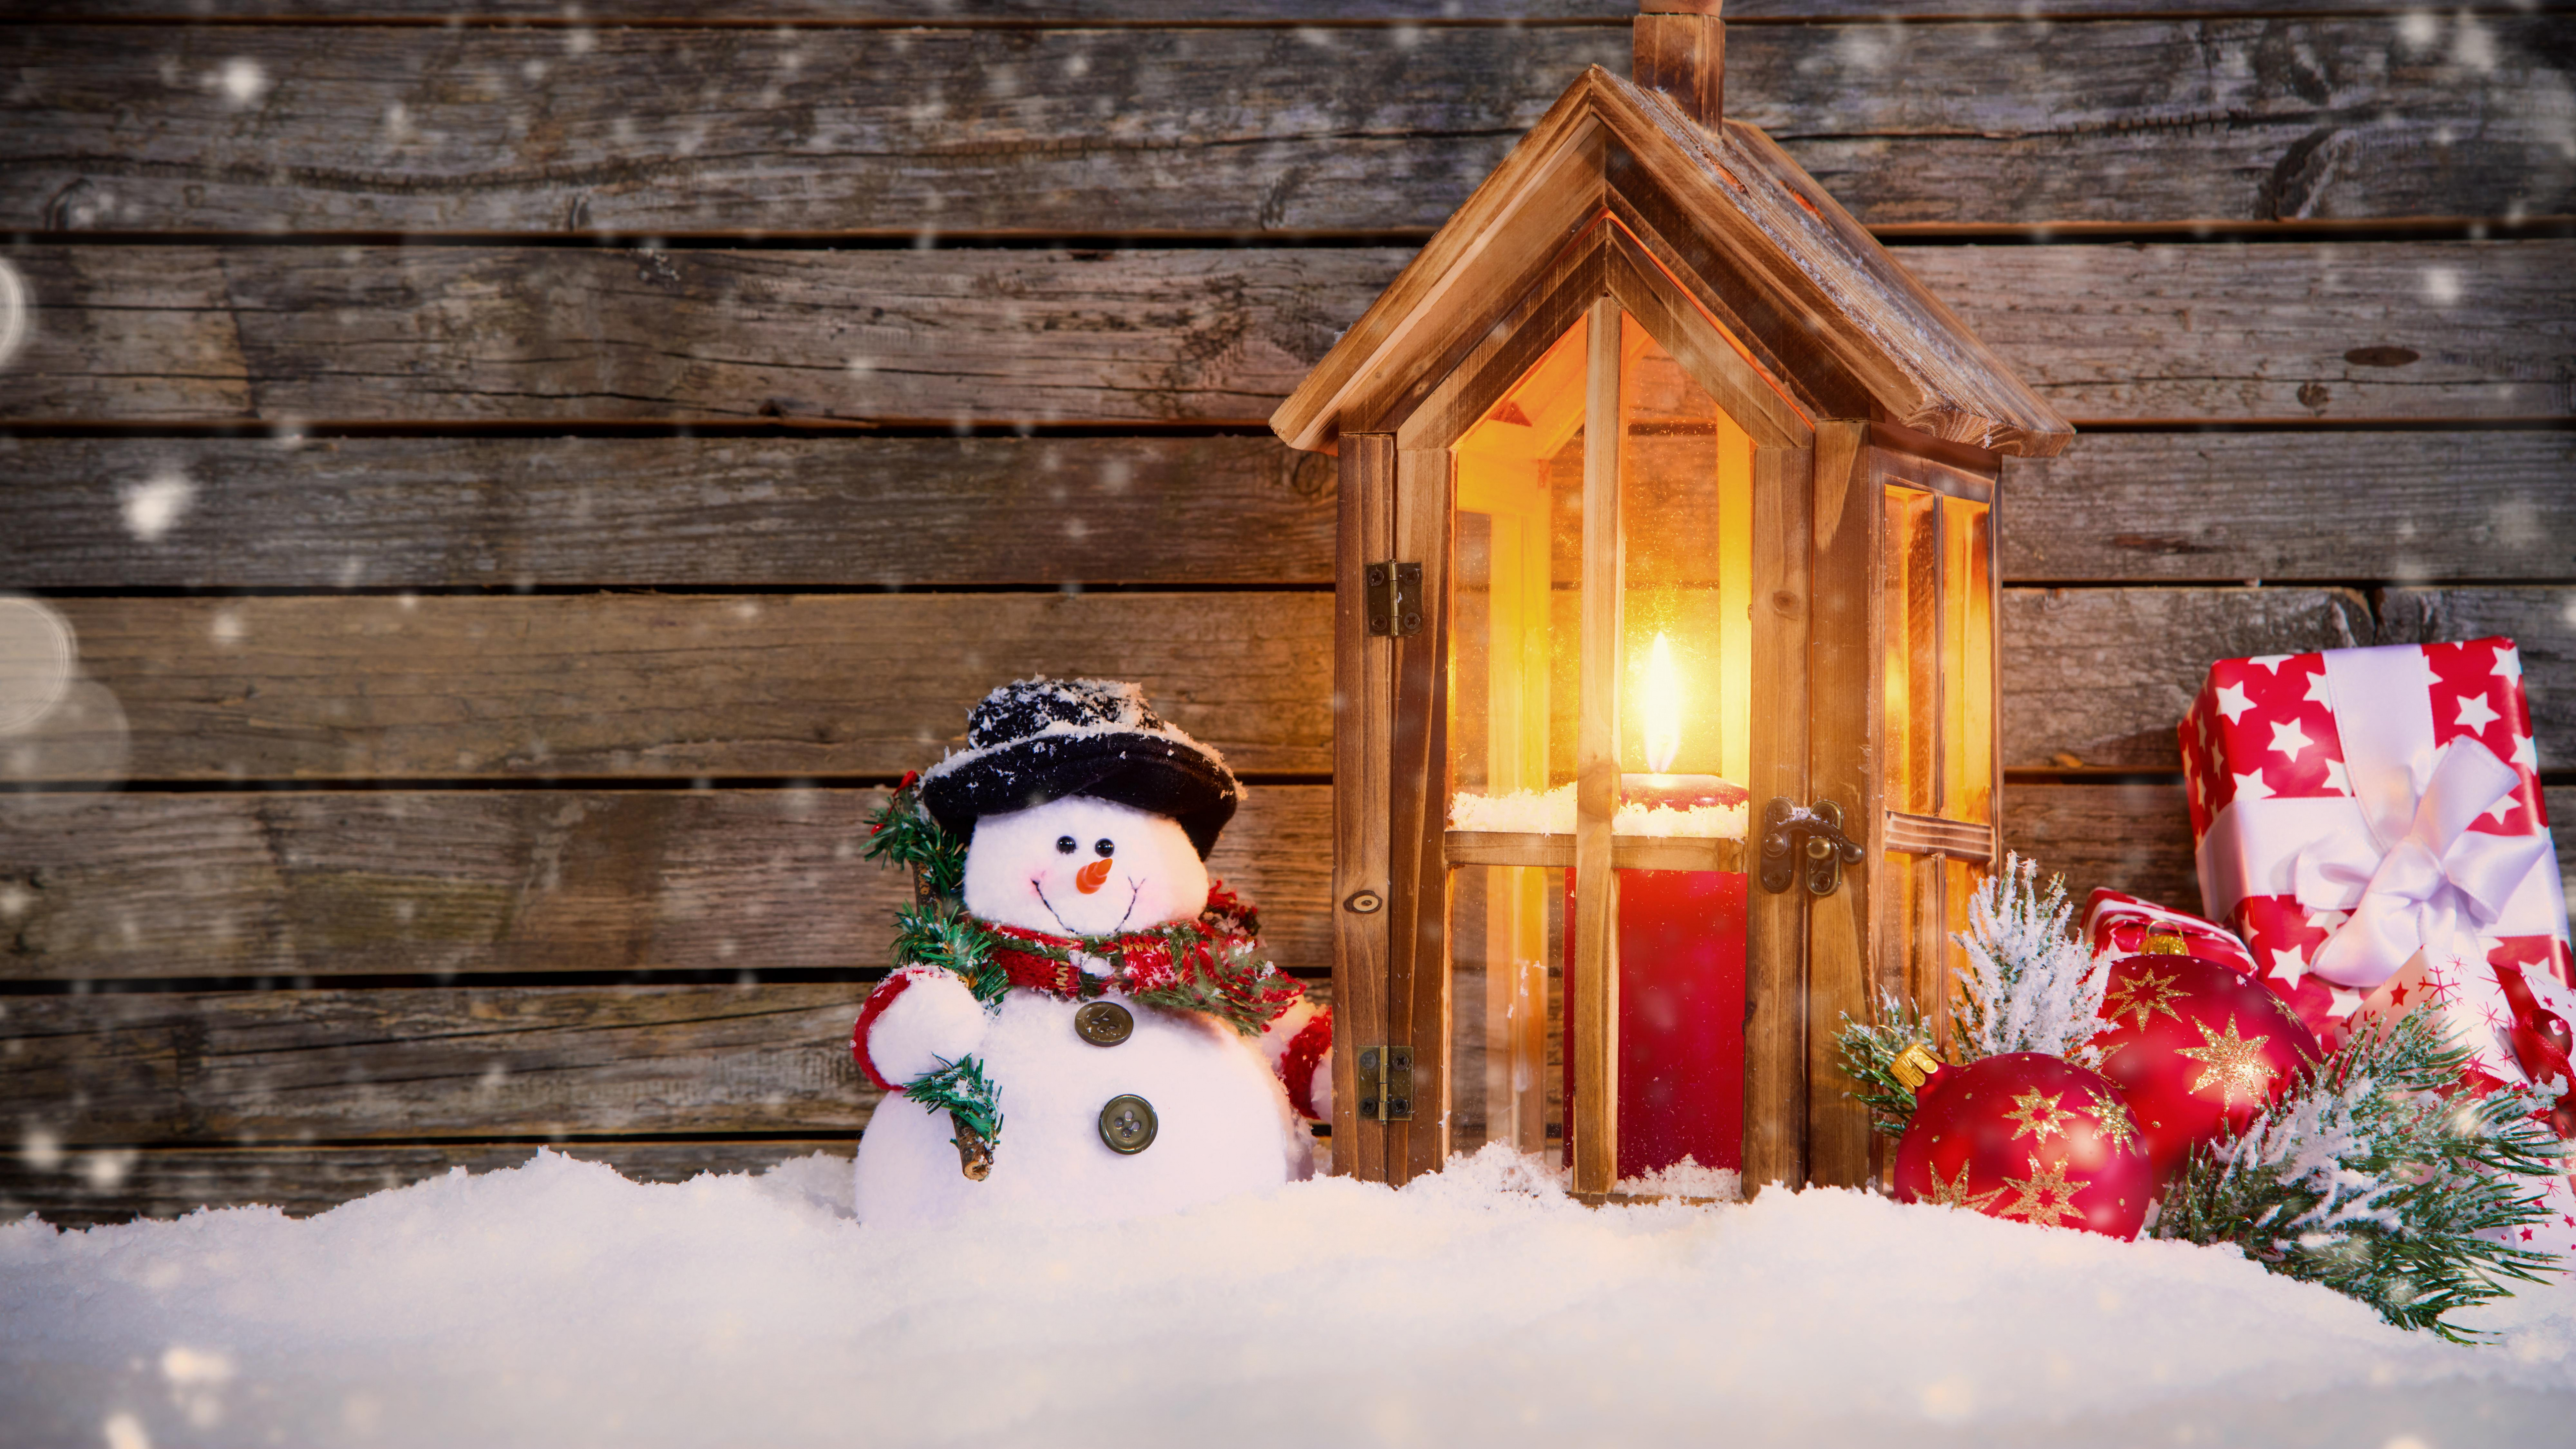 Christmas Day, Snowman, Christmas Decoration, Christmas Ornament, Snow. Wallpaper in 7680x4320 Resolution